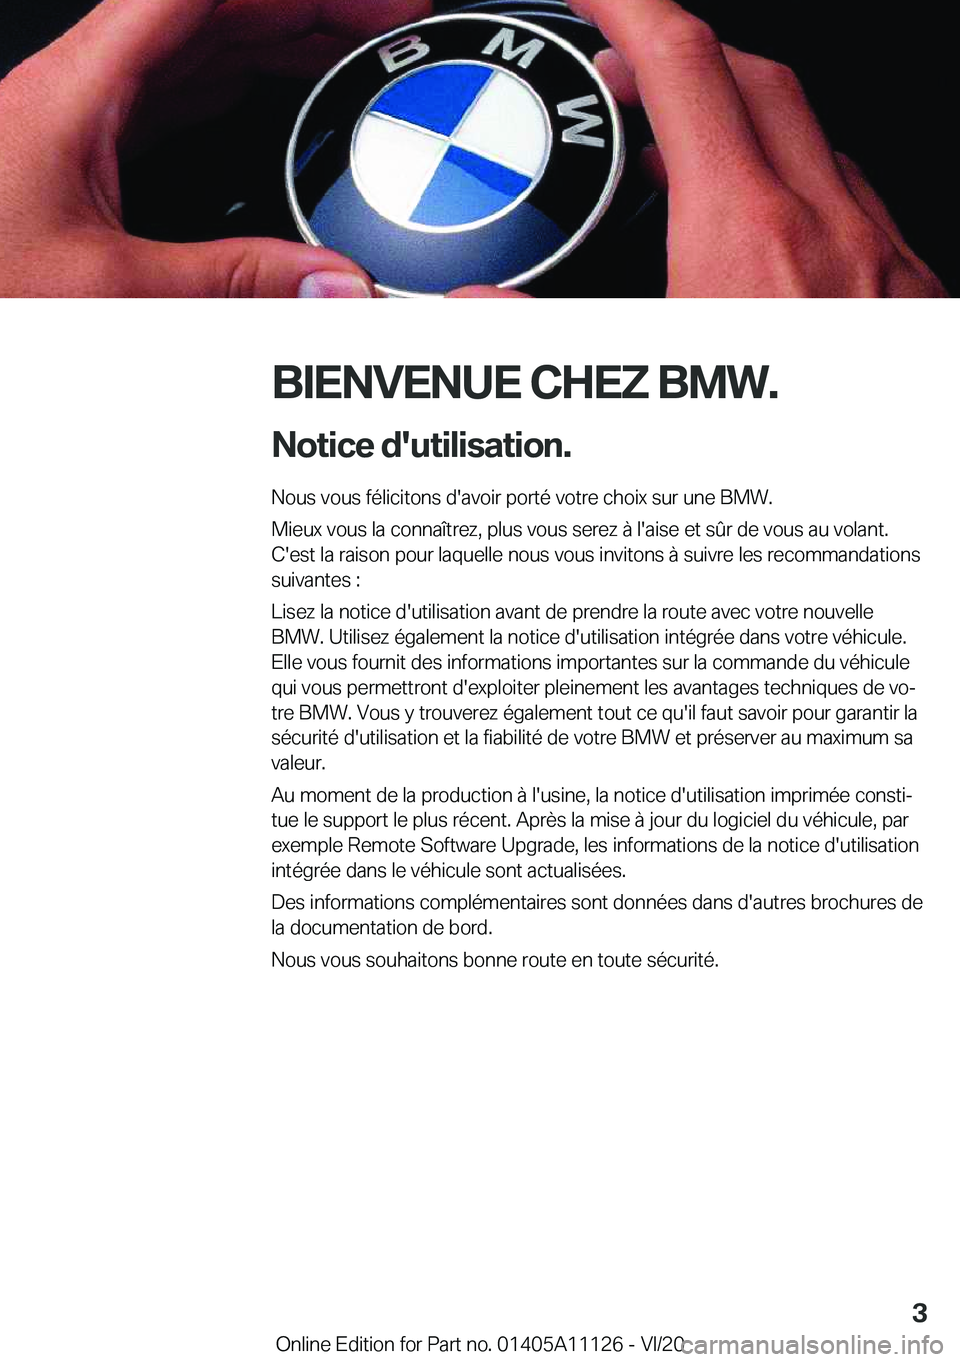 BMW 8 SERIES COUPE 2021  Notices Demploi (in French) �B�I�E�N�V�E�N�U�E��C�H�E�Z��B�M�W�.�N�o�t�i�c�e��d�'�u�t�i�l�i�s�a�t�i�o�n�.
�N�o�u�s��v�o�u�s��f�é�l�i�c�i�t�o�n�s��d�'�a�v�o�i�r��p�o�r�t�é��v�o�t�r�e��c�h�o�i�x��s�u�r��u�n�e�